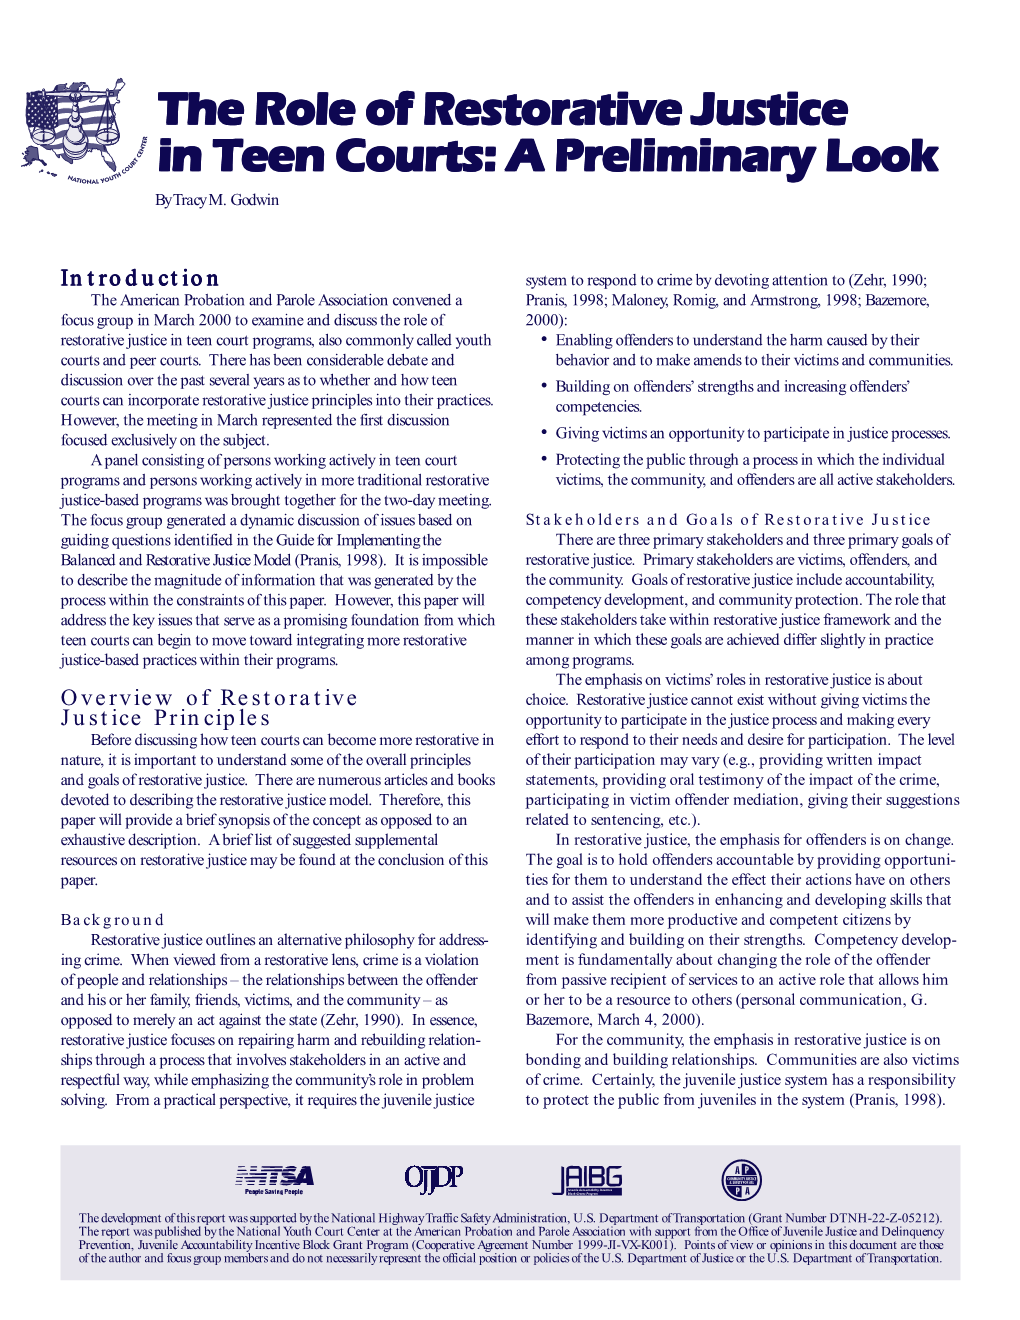 Role of Restorative Justice in Teen Courts: a Preliminary Look